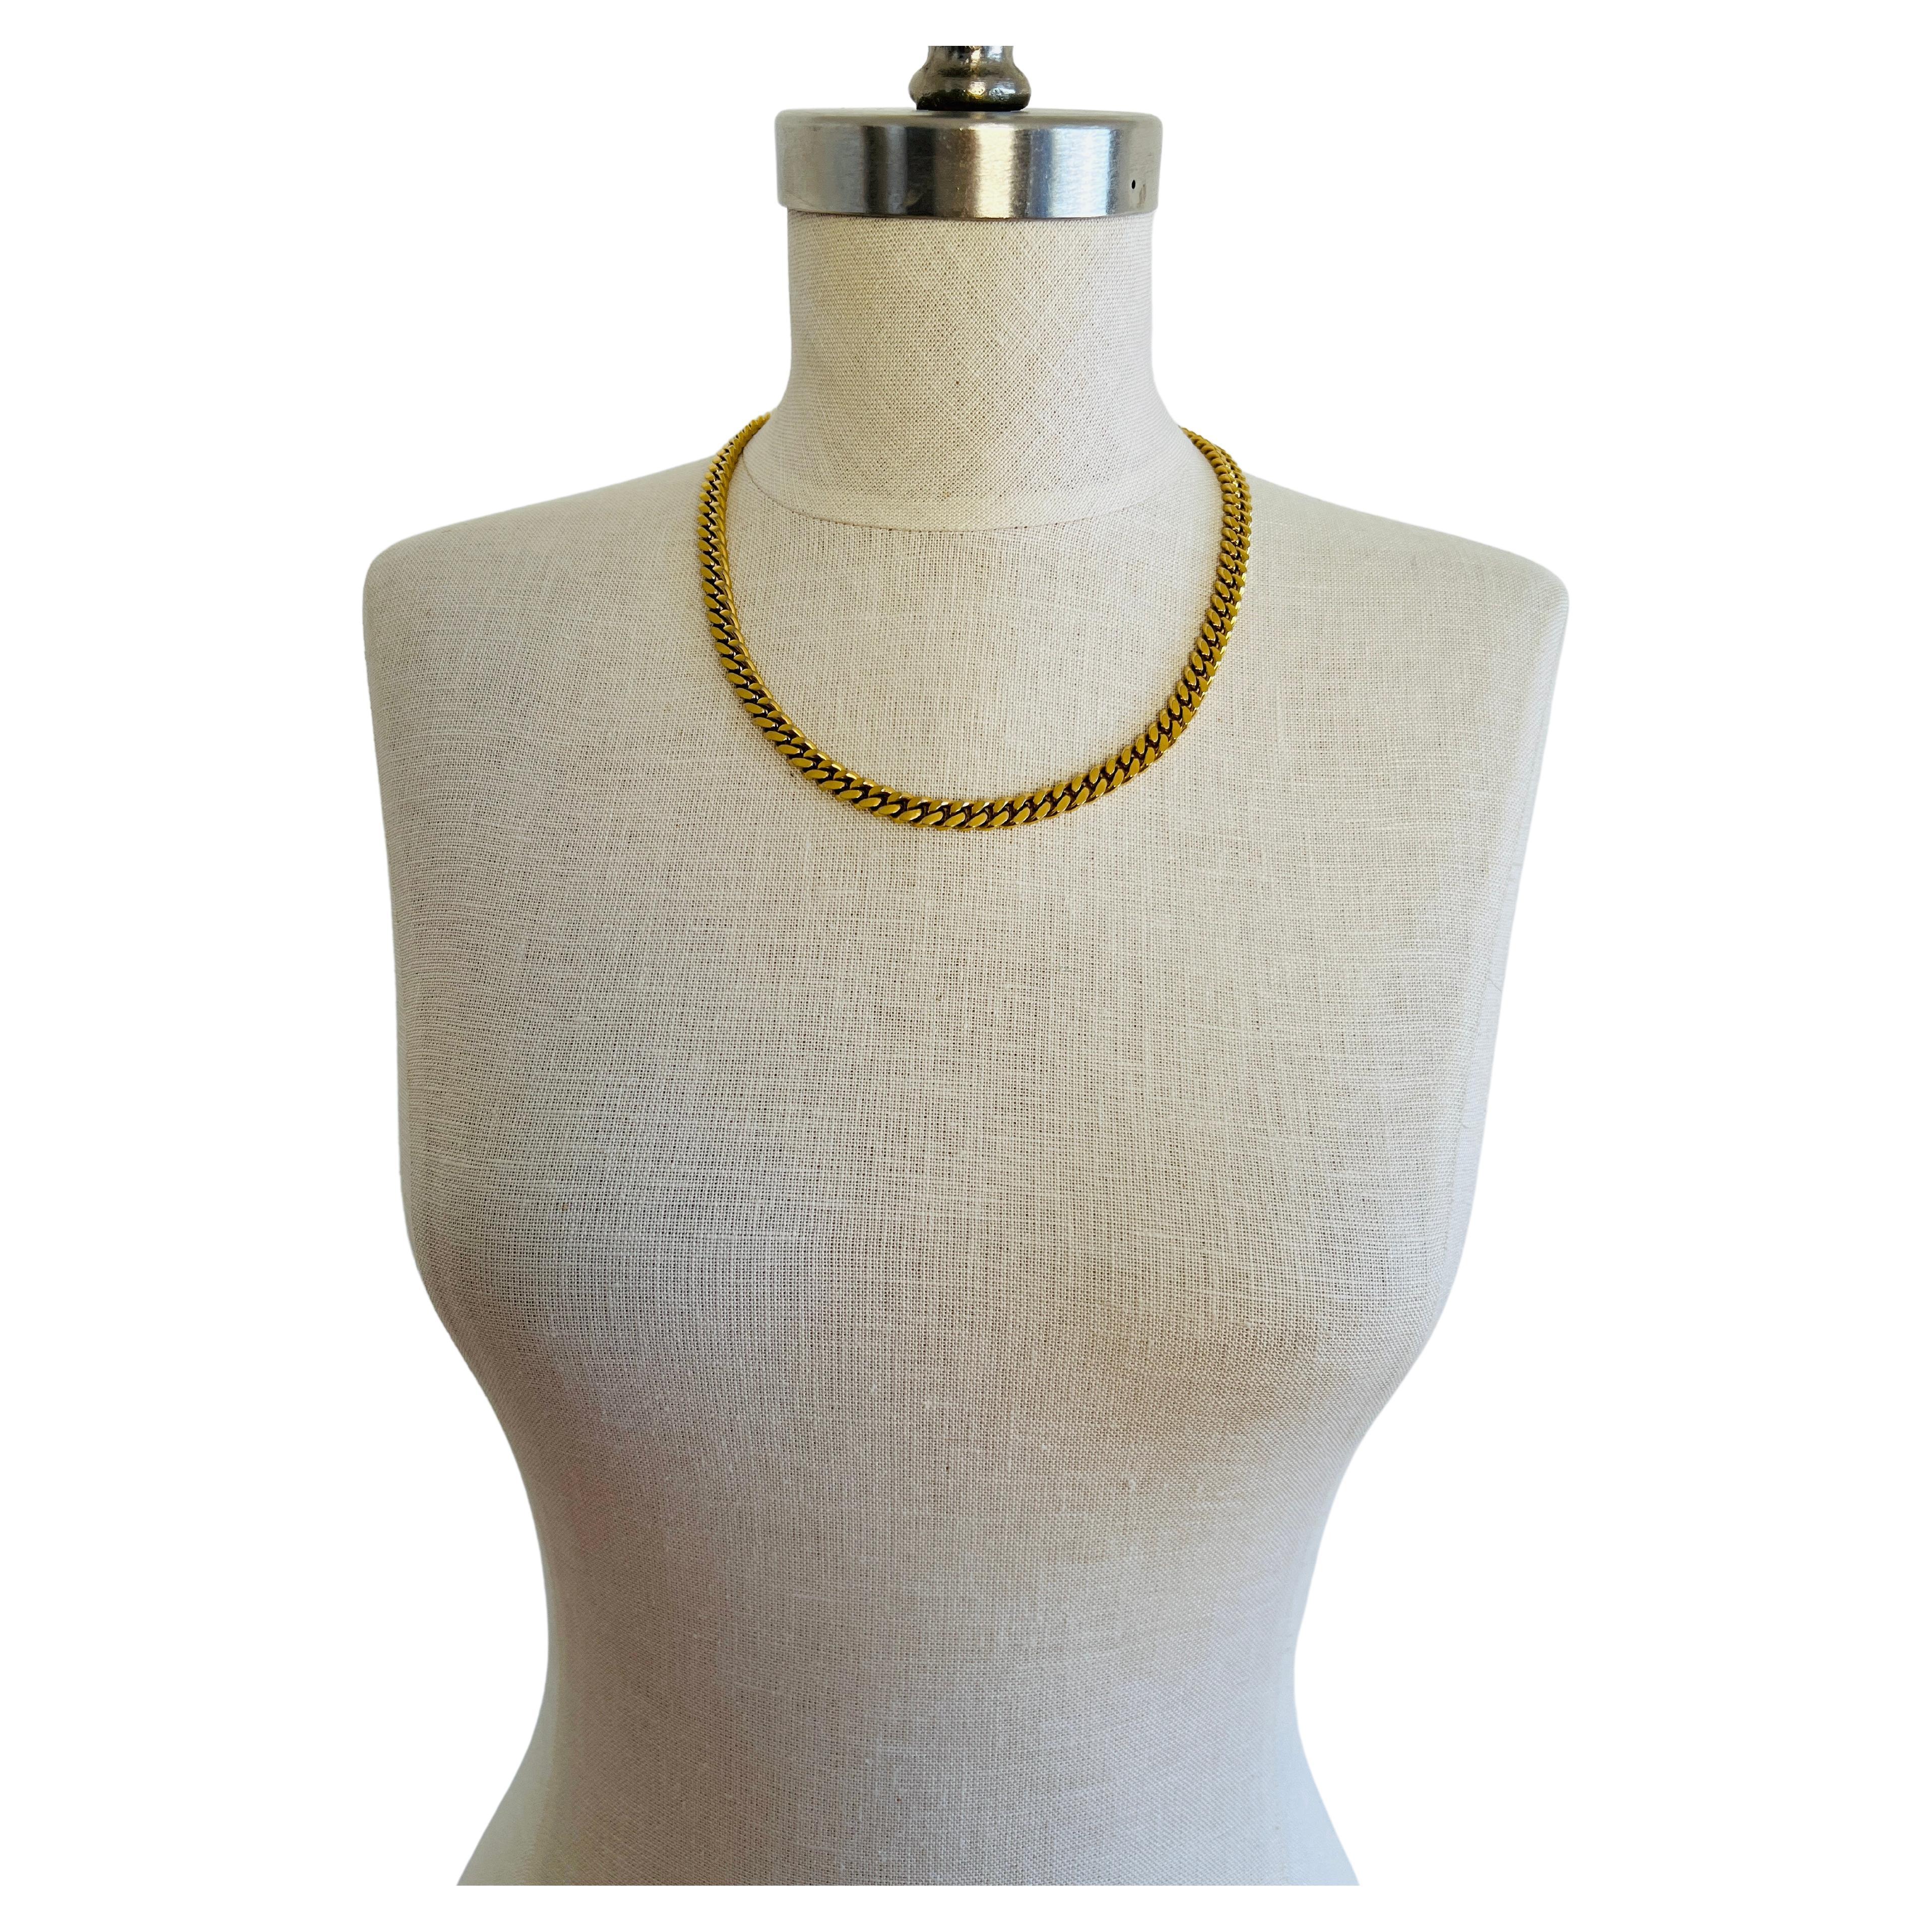 Fabulous gold gold chain necklace by Monet. Well-constructed with a hefty weight. This is the perfect layering piece or it can simply be worn alone!

Length: 20